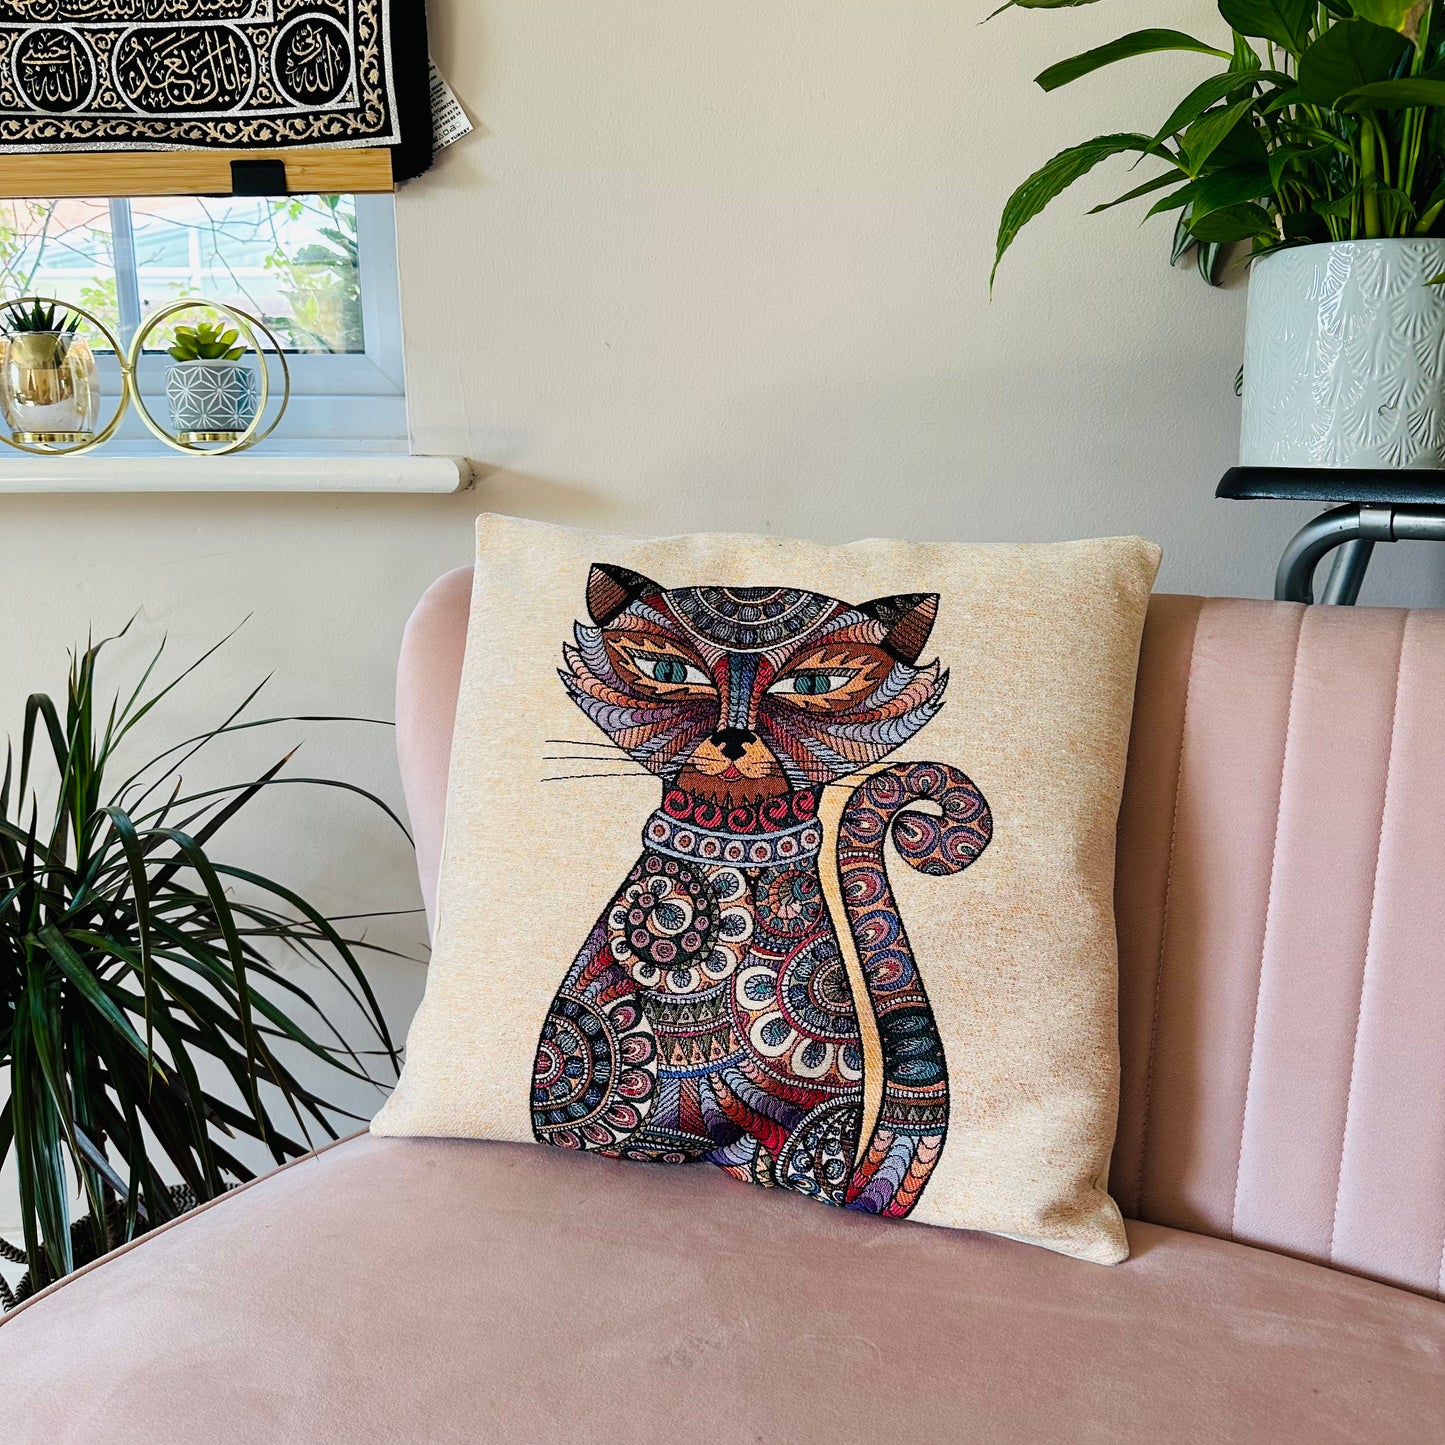 Tabby Cat Tapestry Embroidered Cushion Cover (43 x 43 cm)